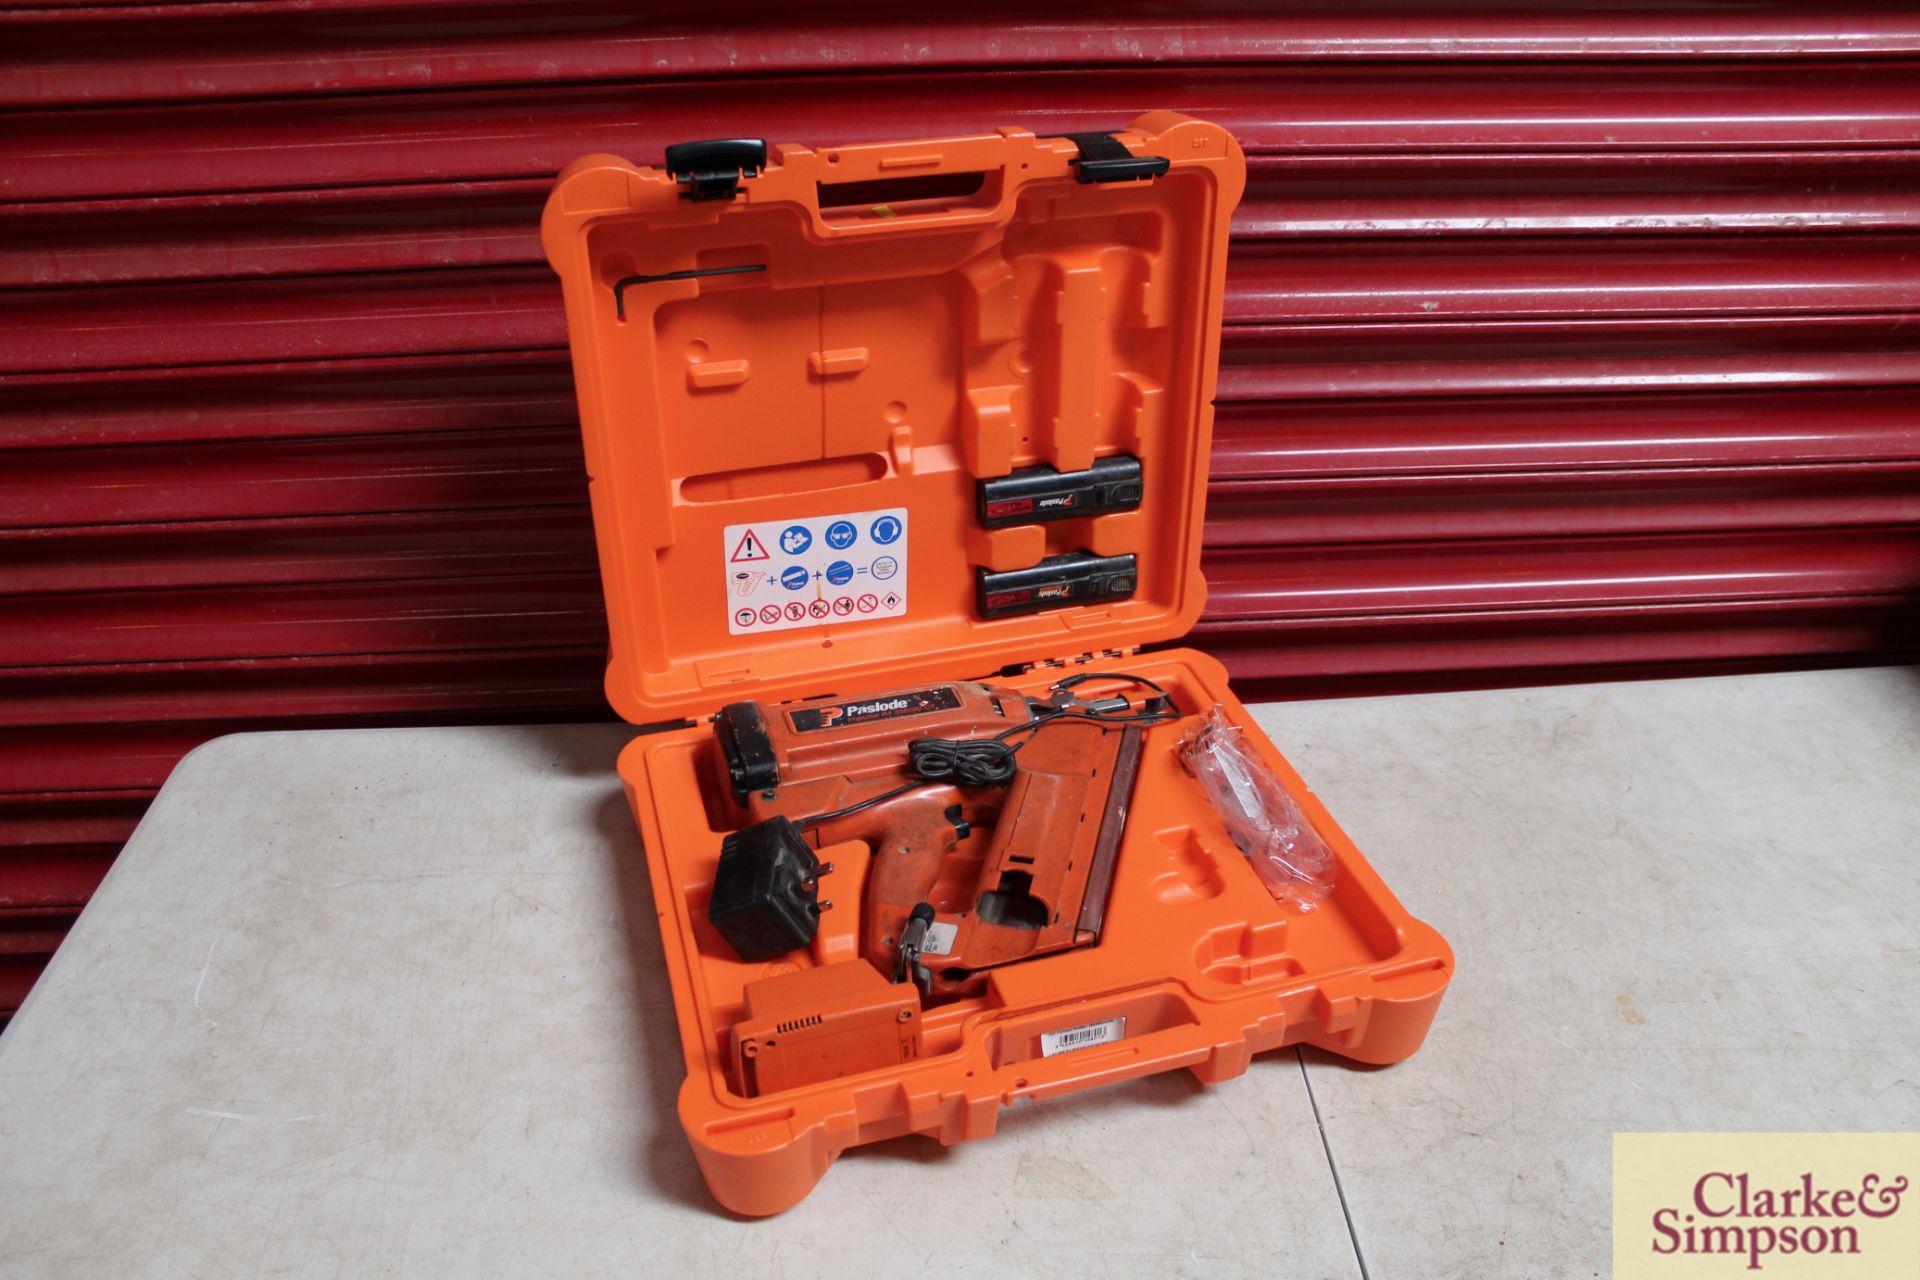 Paslode Impluse IM 350/90 CT nail gun with two batteries and charger in case.